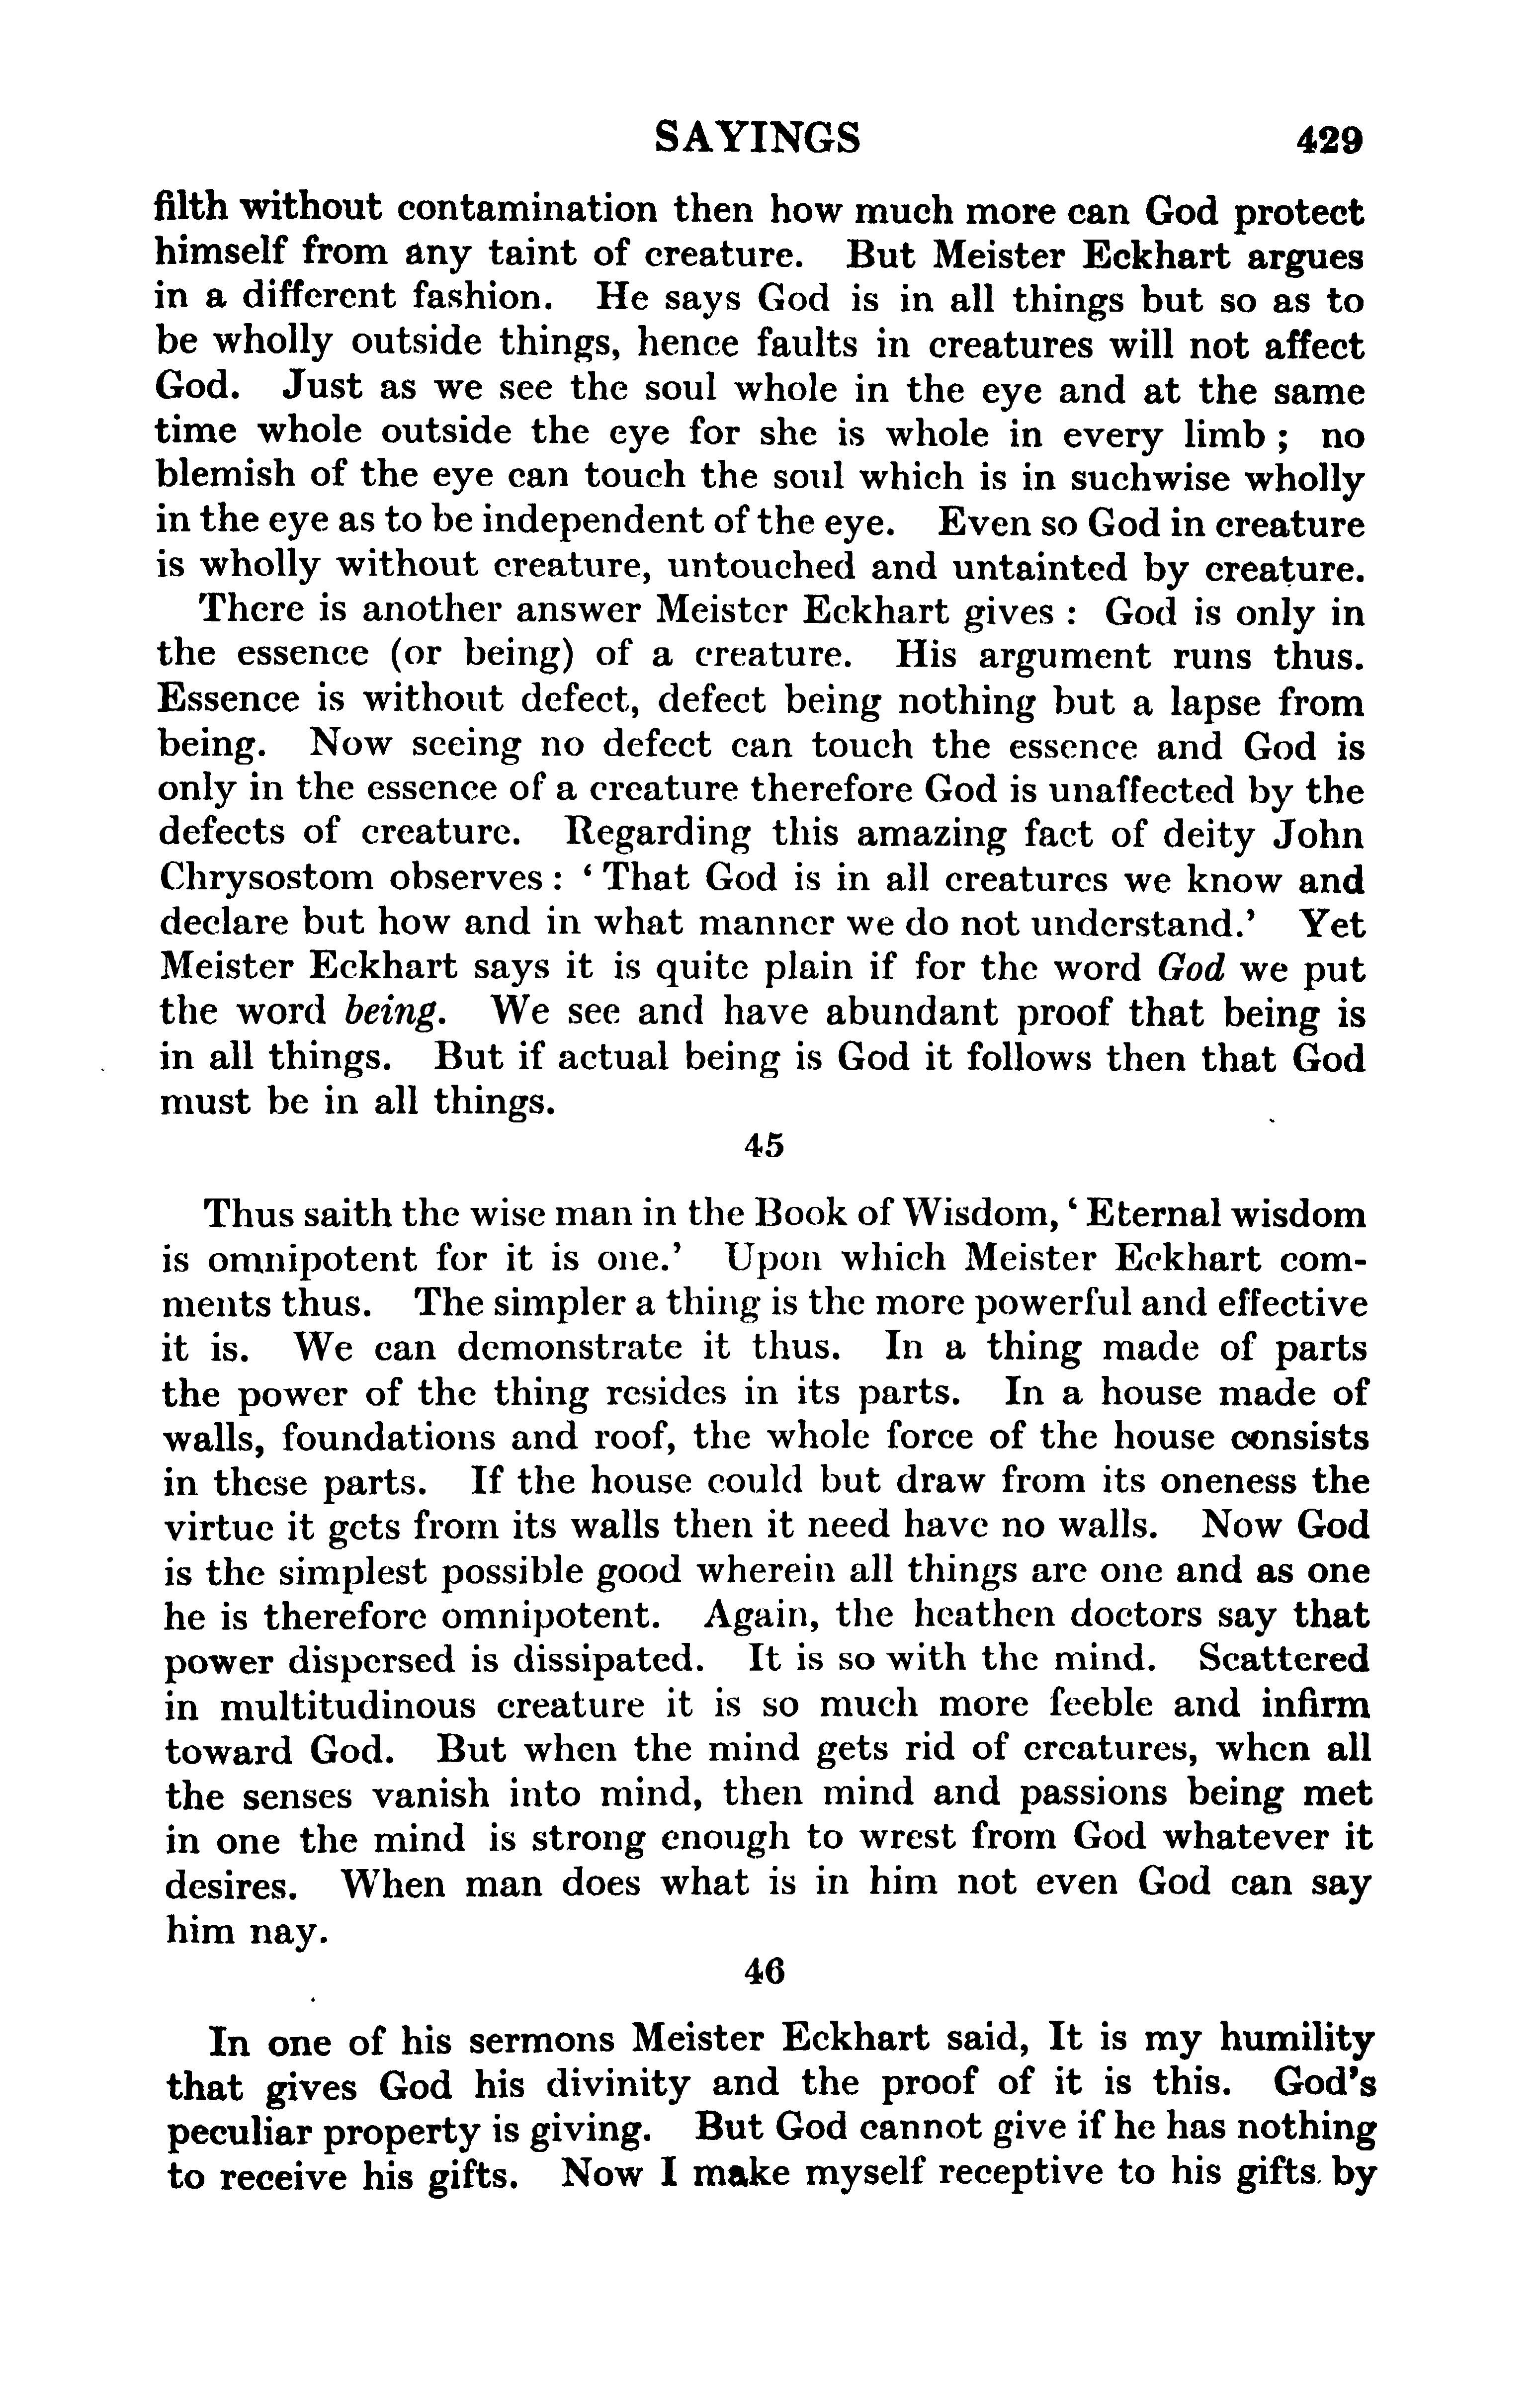 Image of page 0453